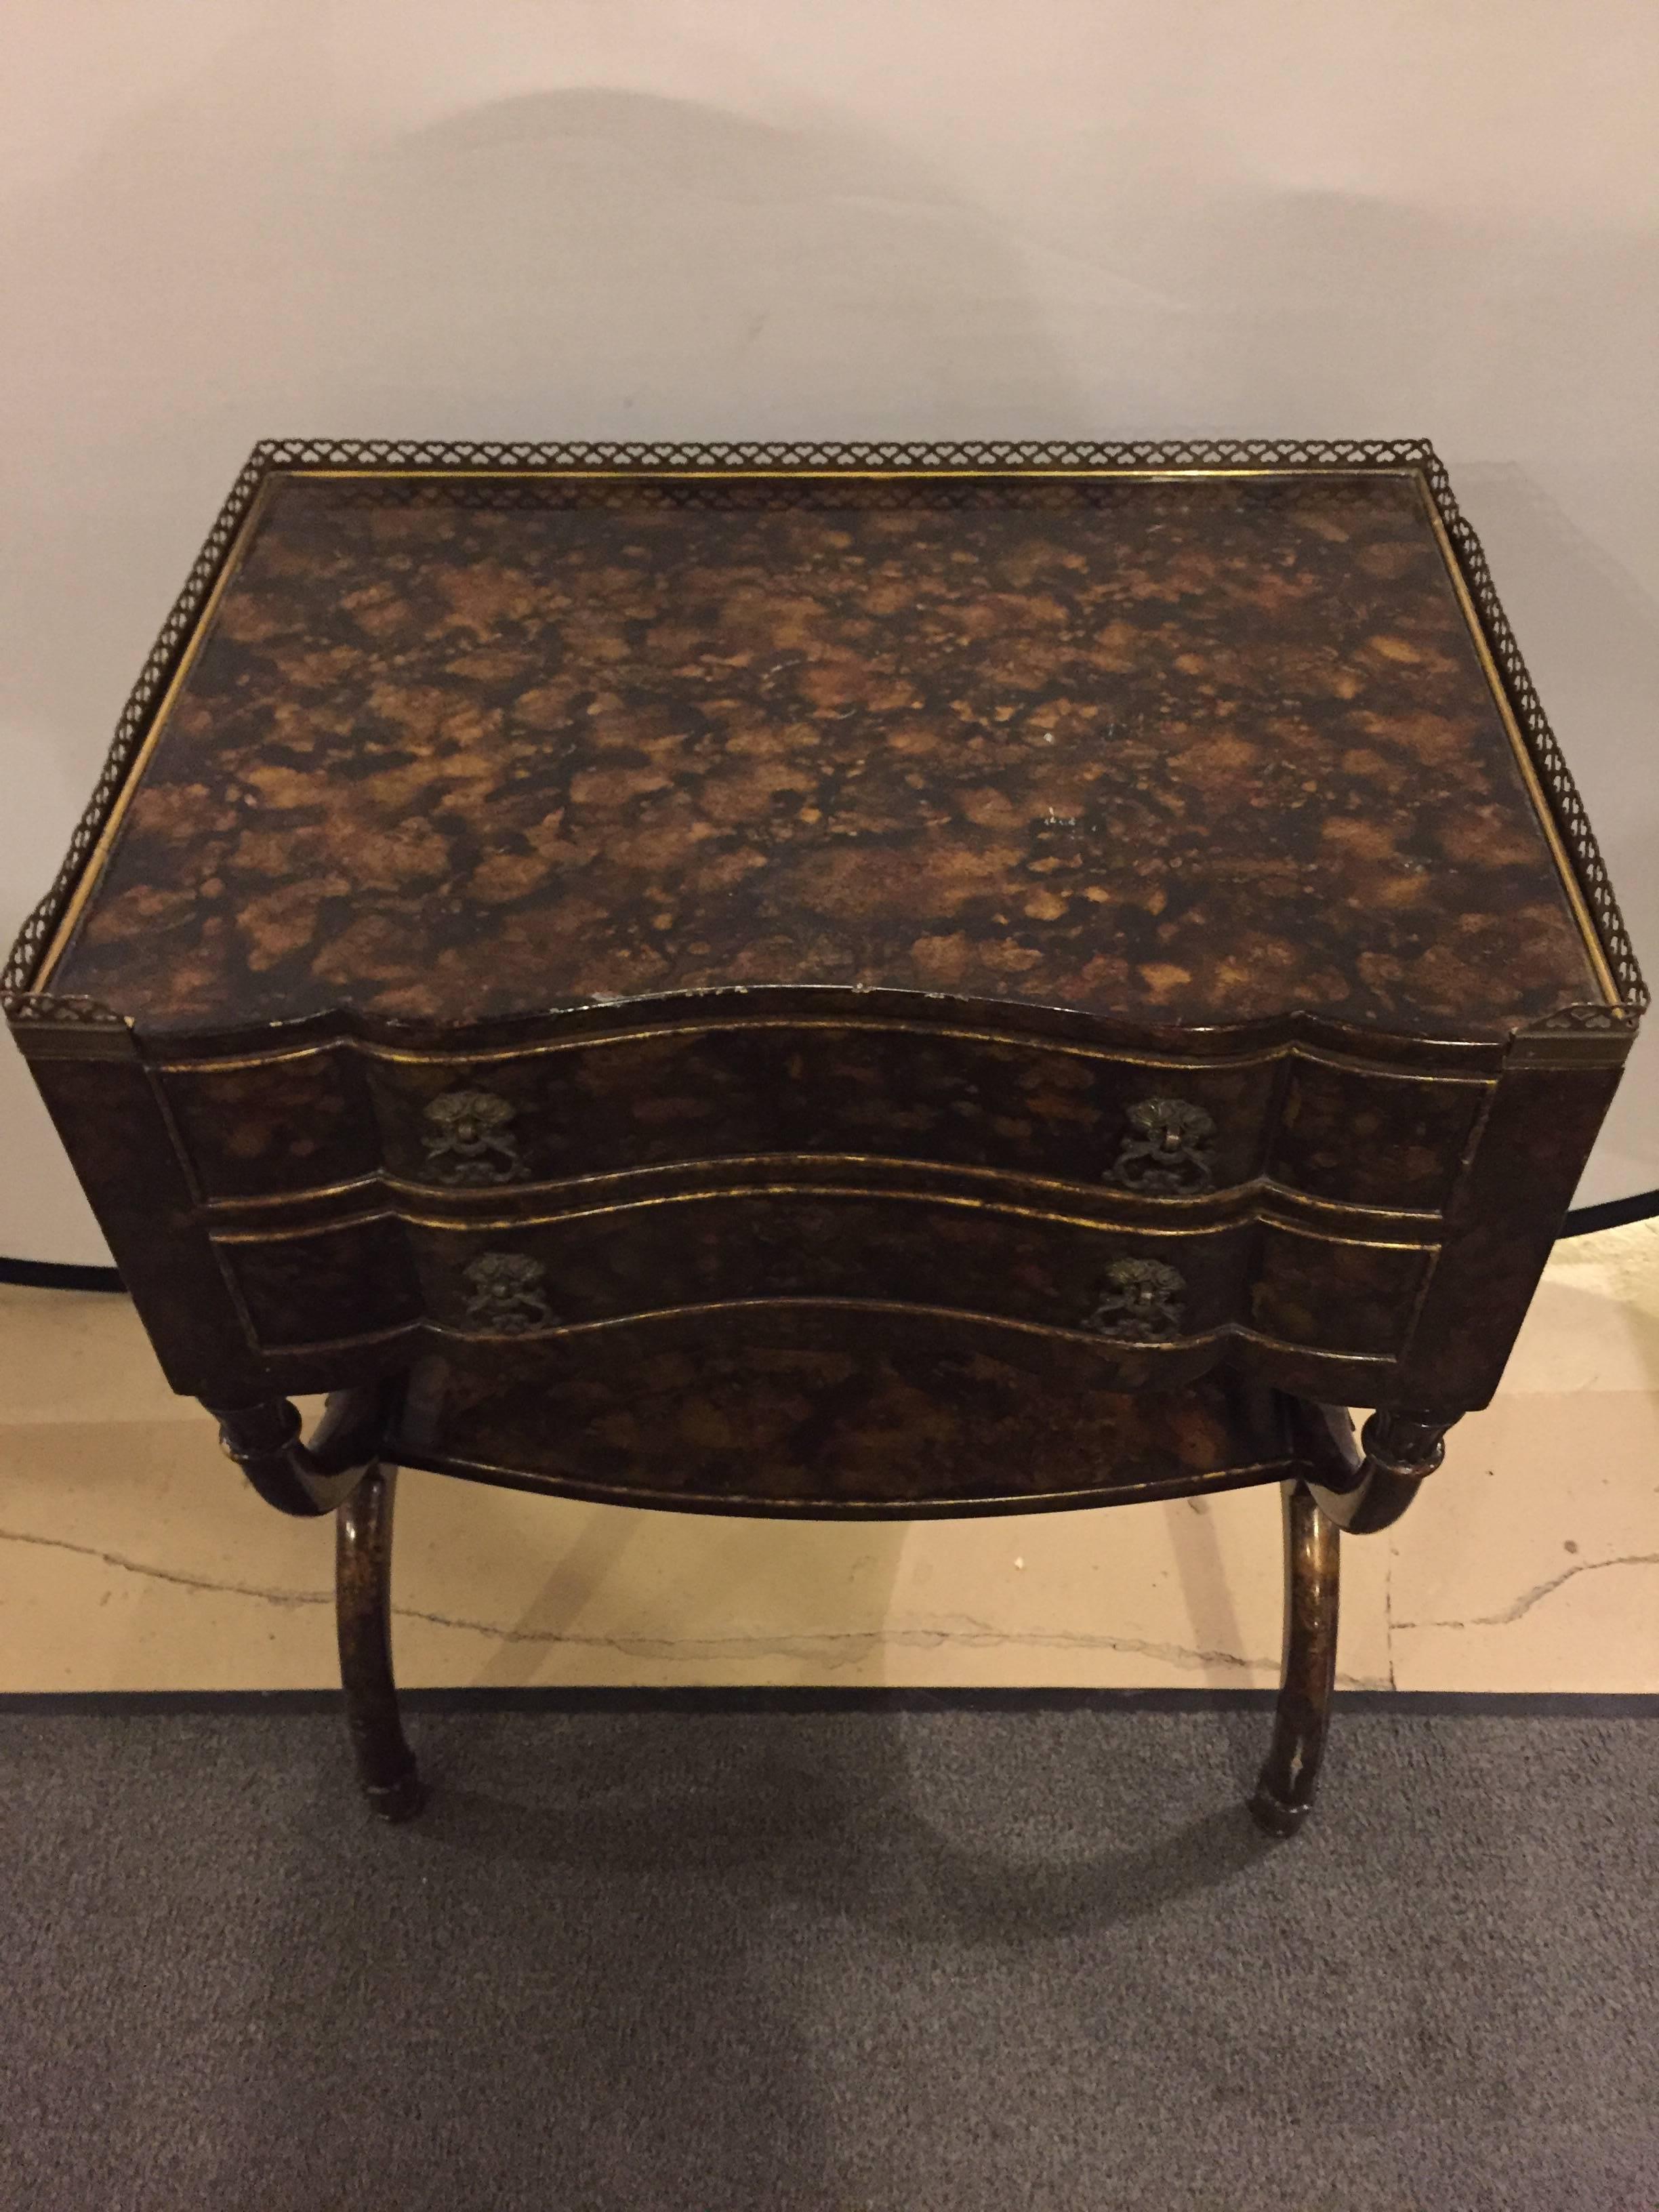 An Art Deco Regency style Faux tortoise decorated end table. Having two drawers and a lower shelf on double U formed legs.